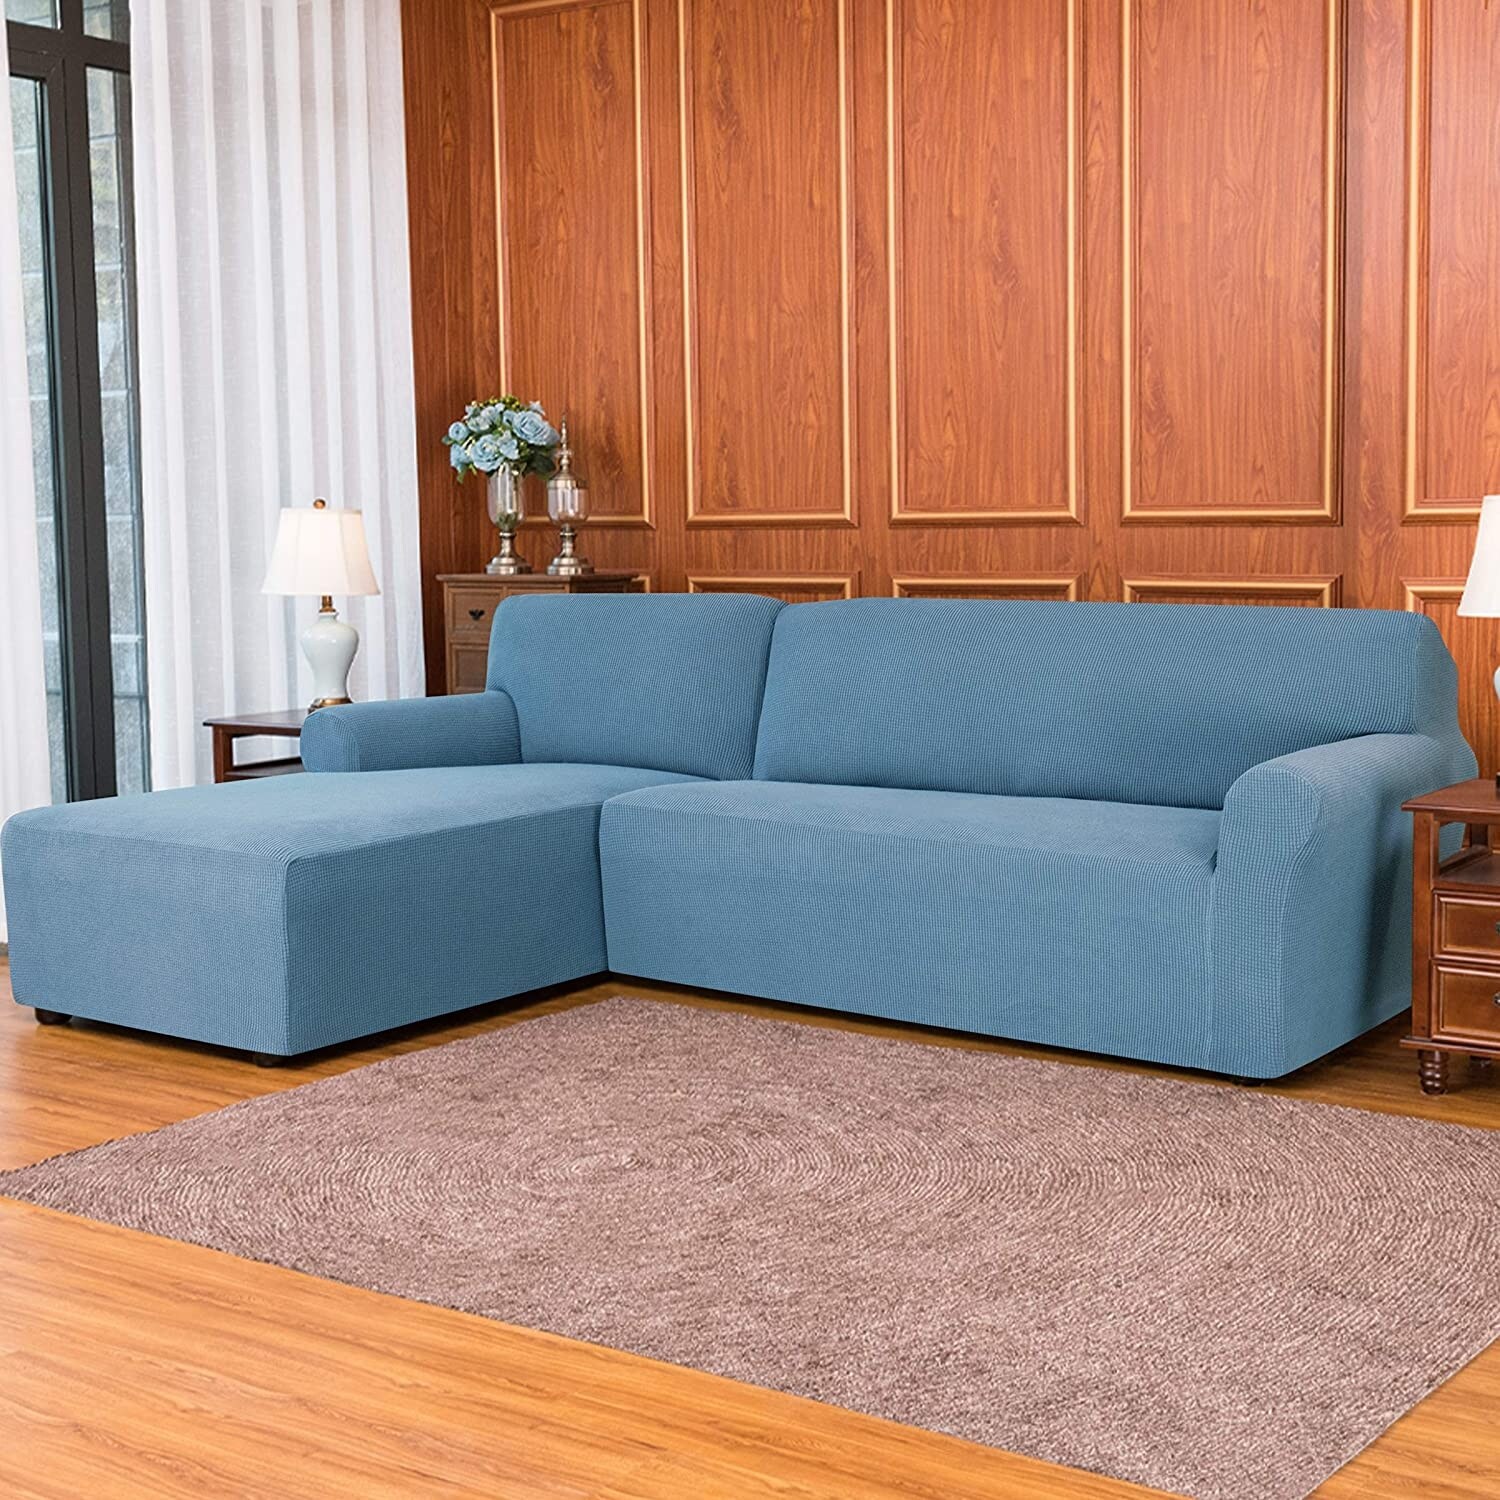 Details about   Corner Sofa Covers for Room Cover Stretch Slipcover L Shape Must Buy 2 Pieces 